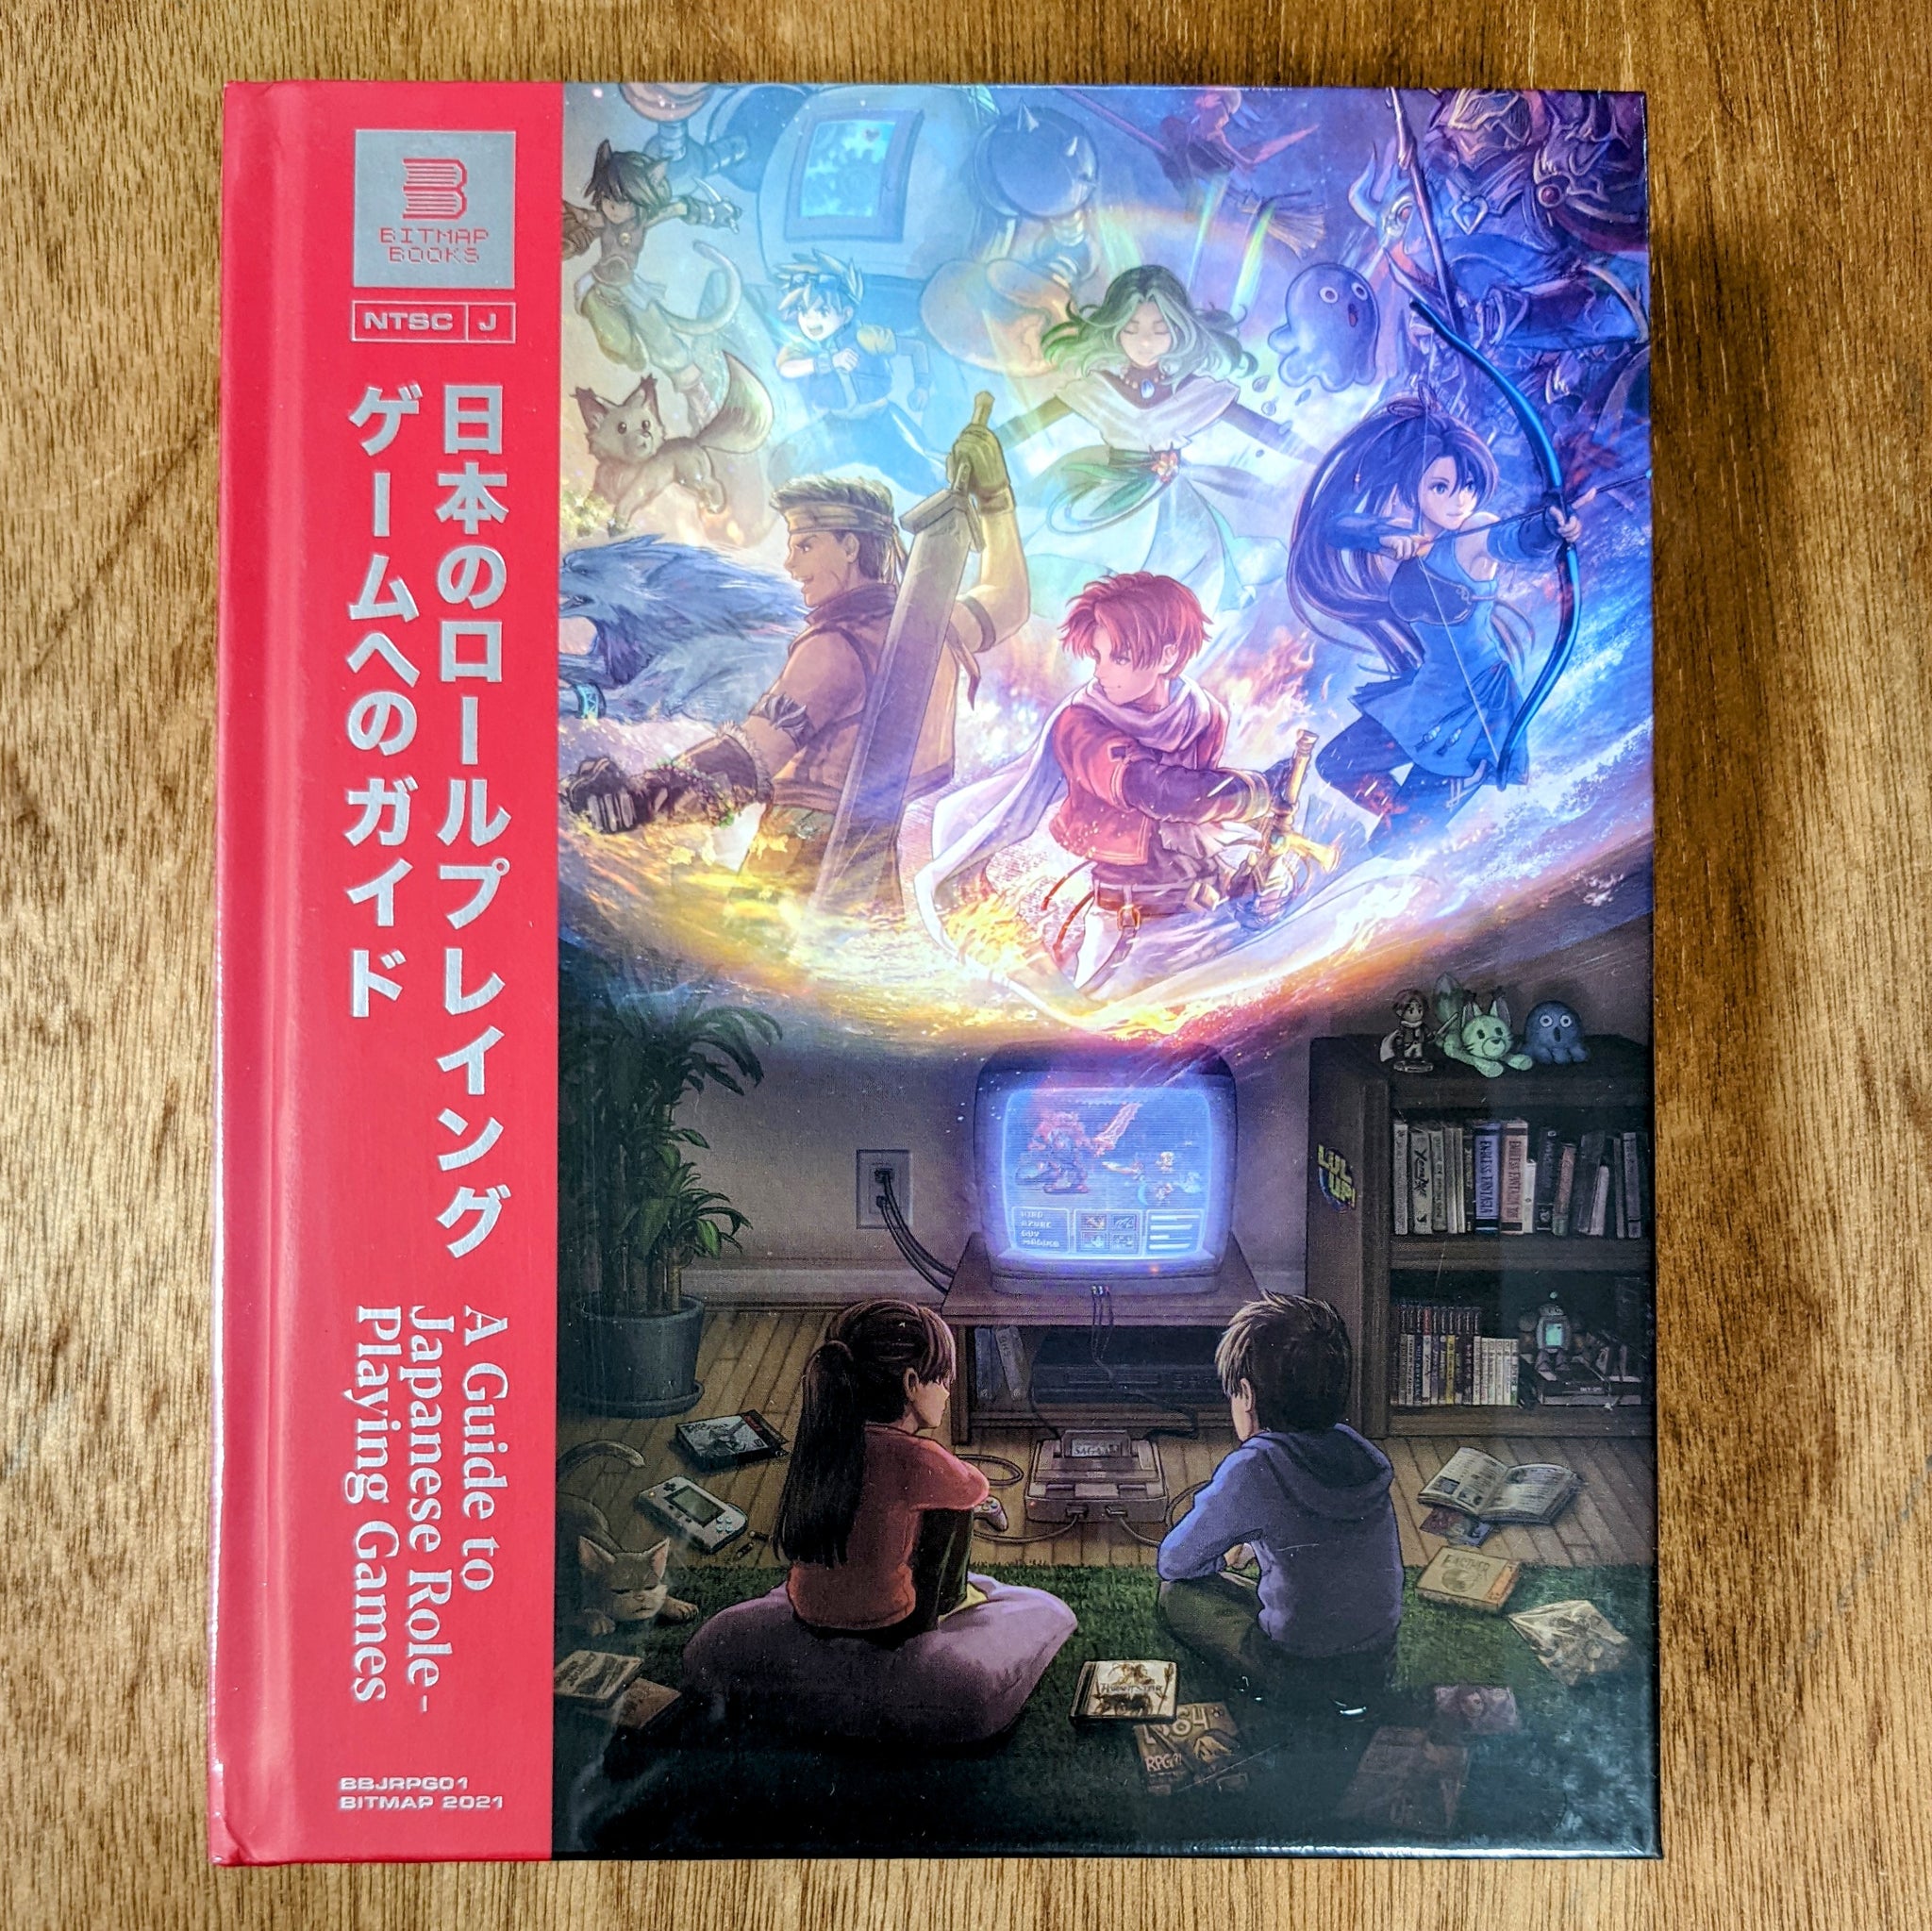 [SOLD OUT] THE JRPG BOOK: A Guide to Japanese Role-Playing Games - Deluxe Hardcover book